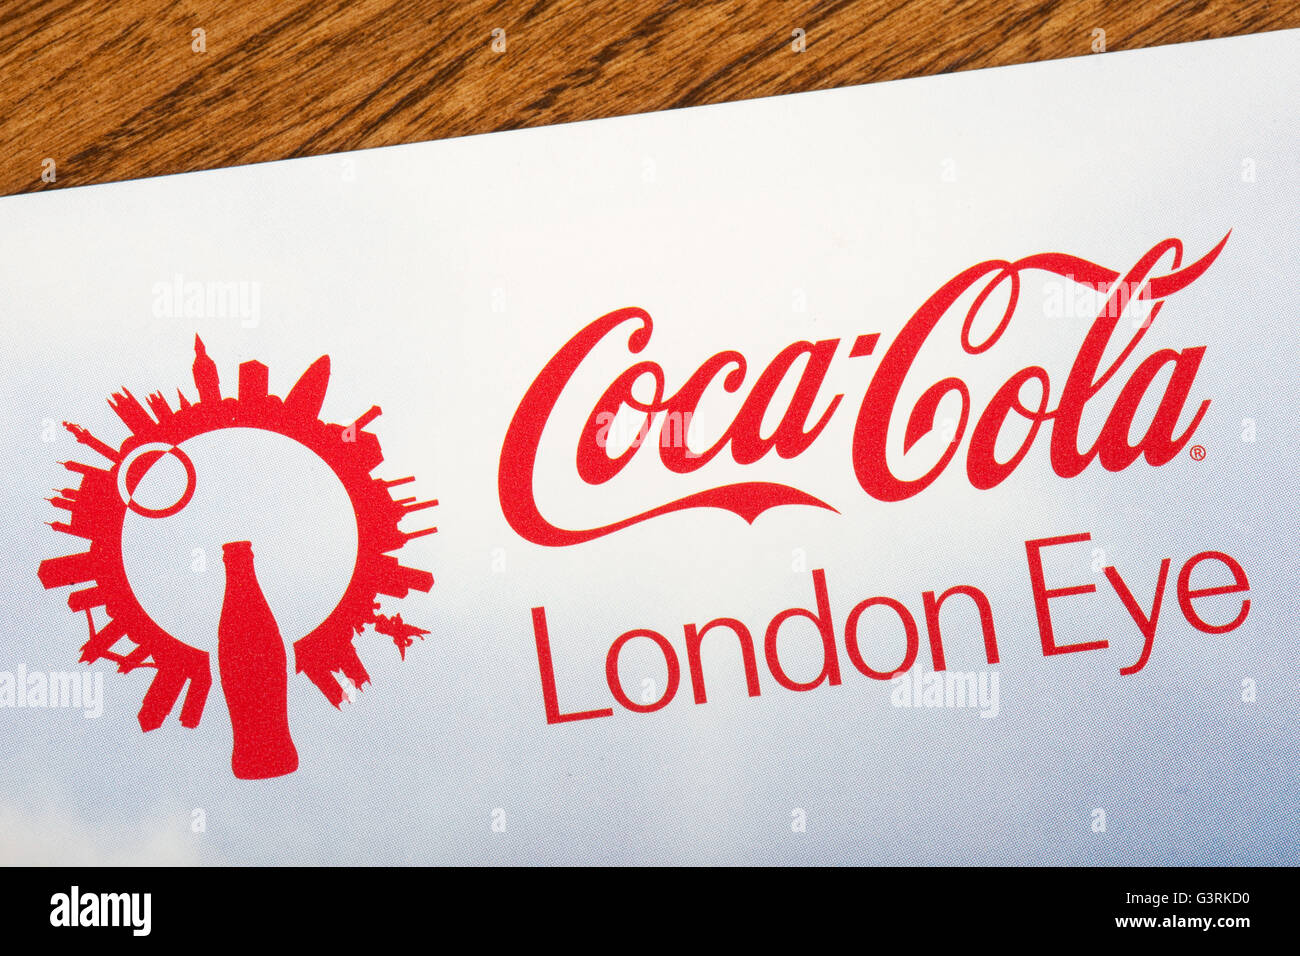 Watch: what do people think of Coca-Cola's sponsorship of The London Eye?